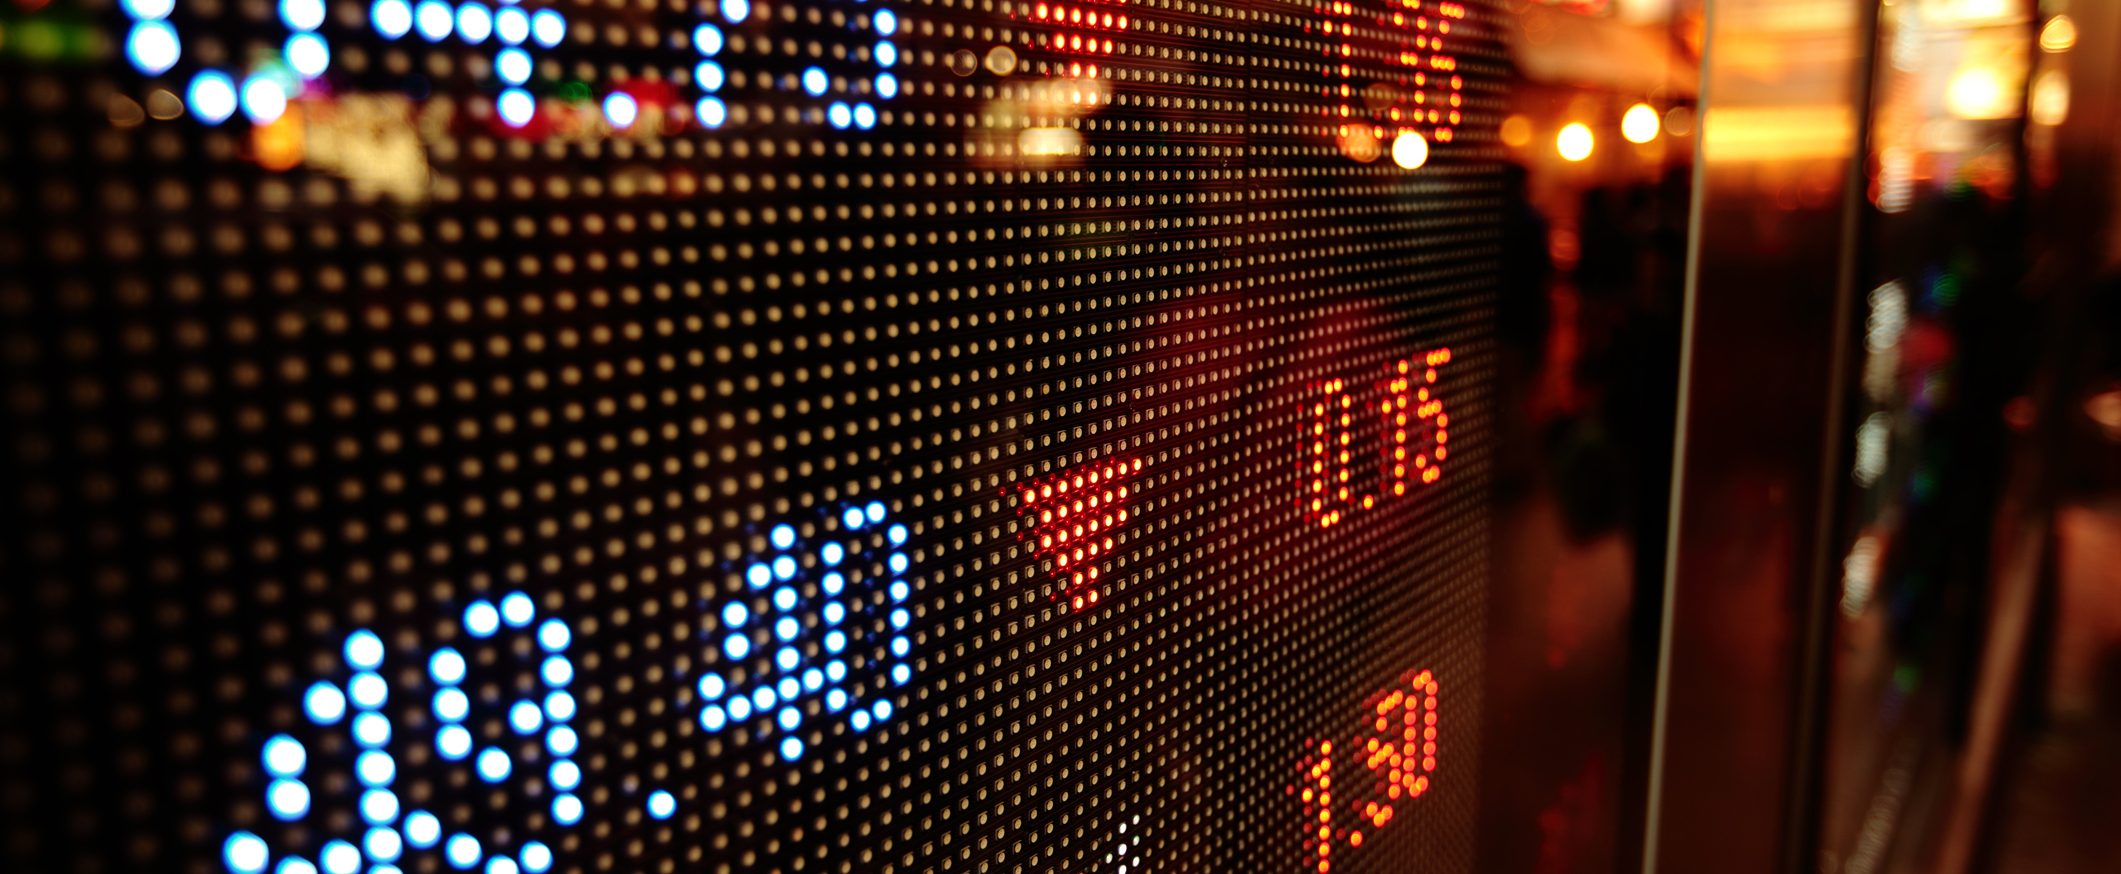 An image of a stock market ticker board with neon numbers and a downward-pointing triangle.